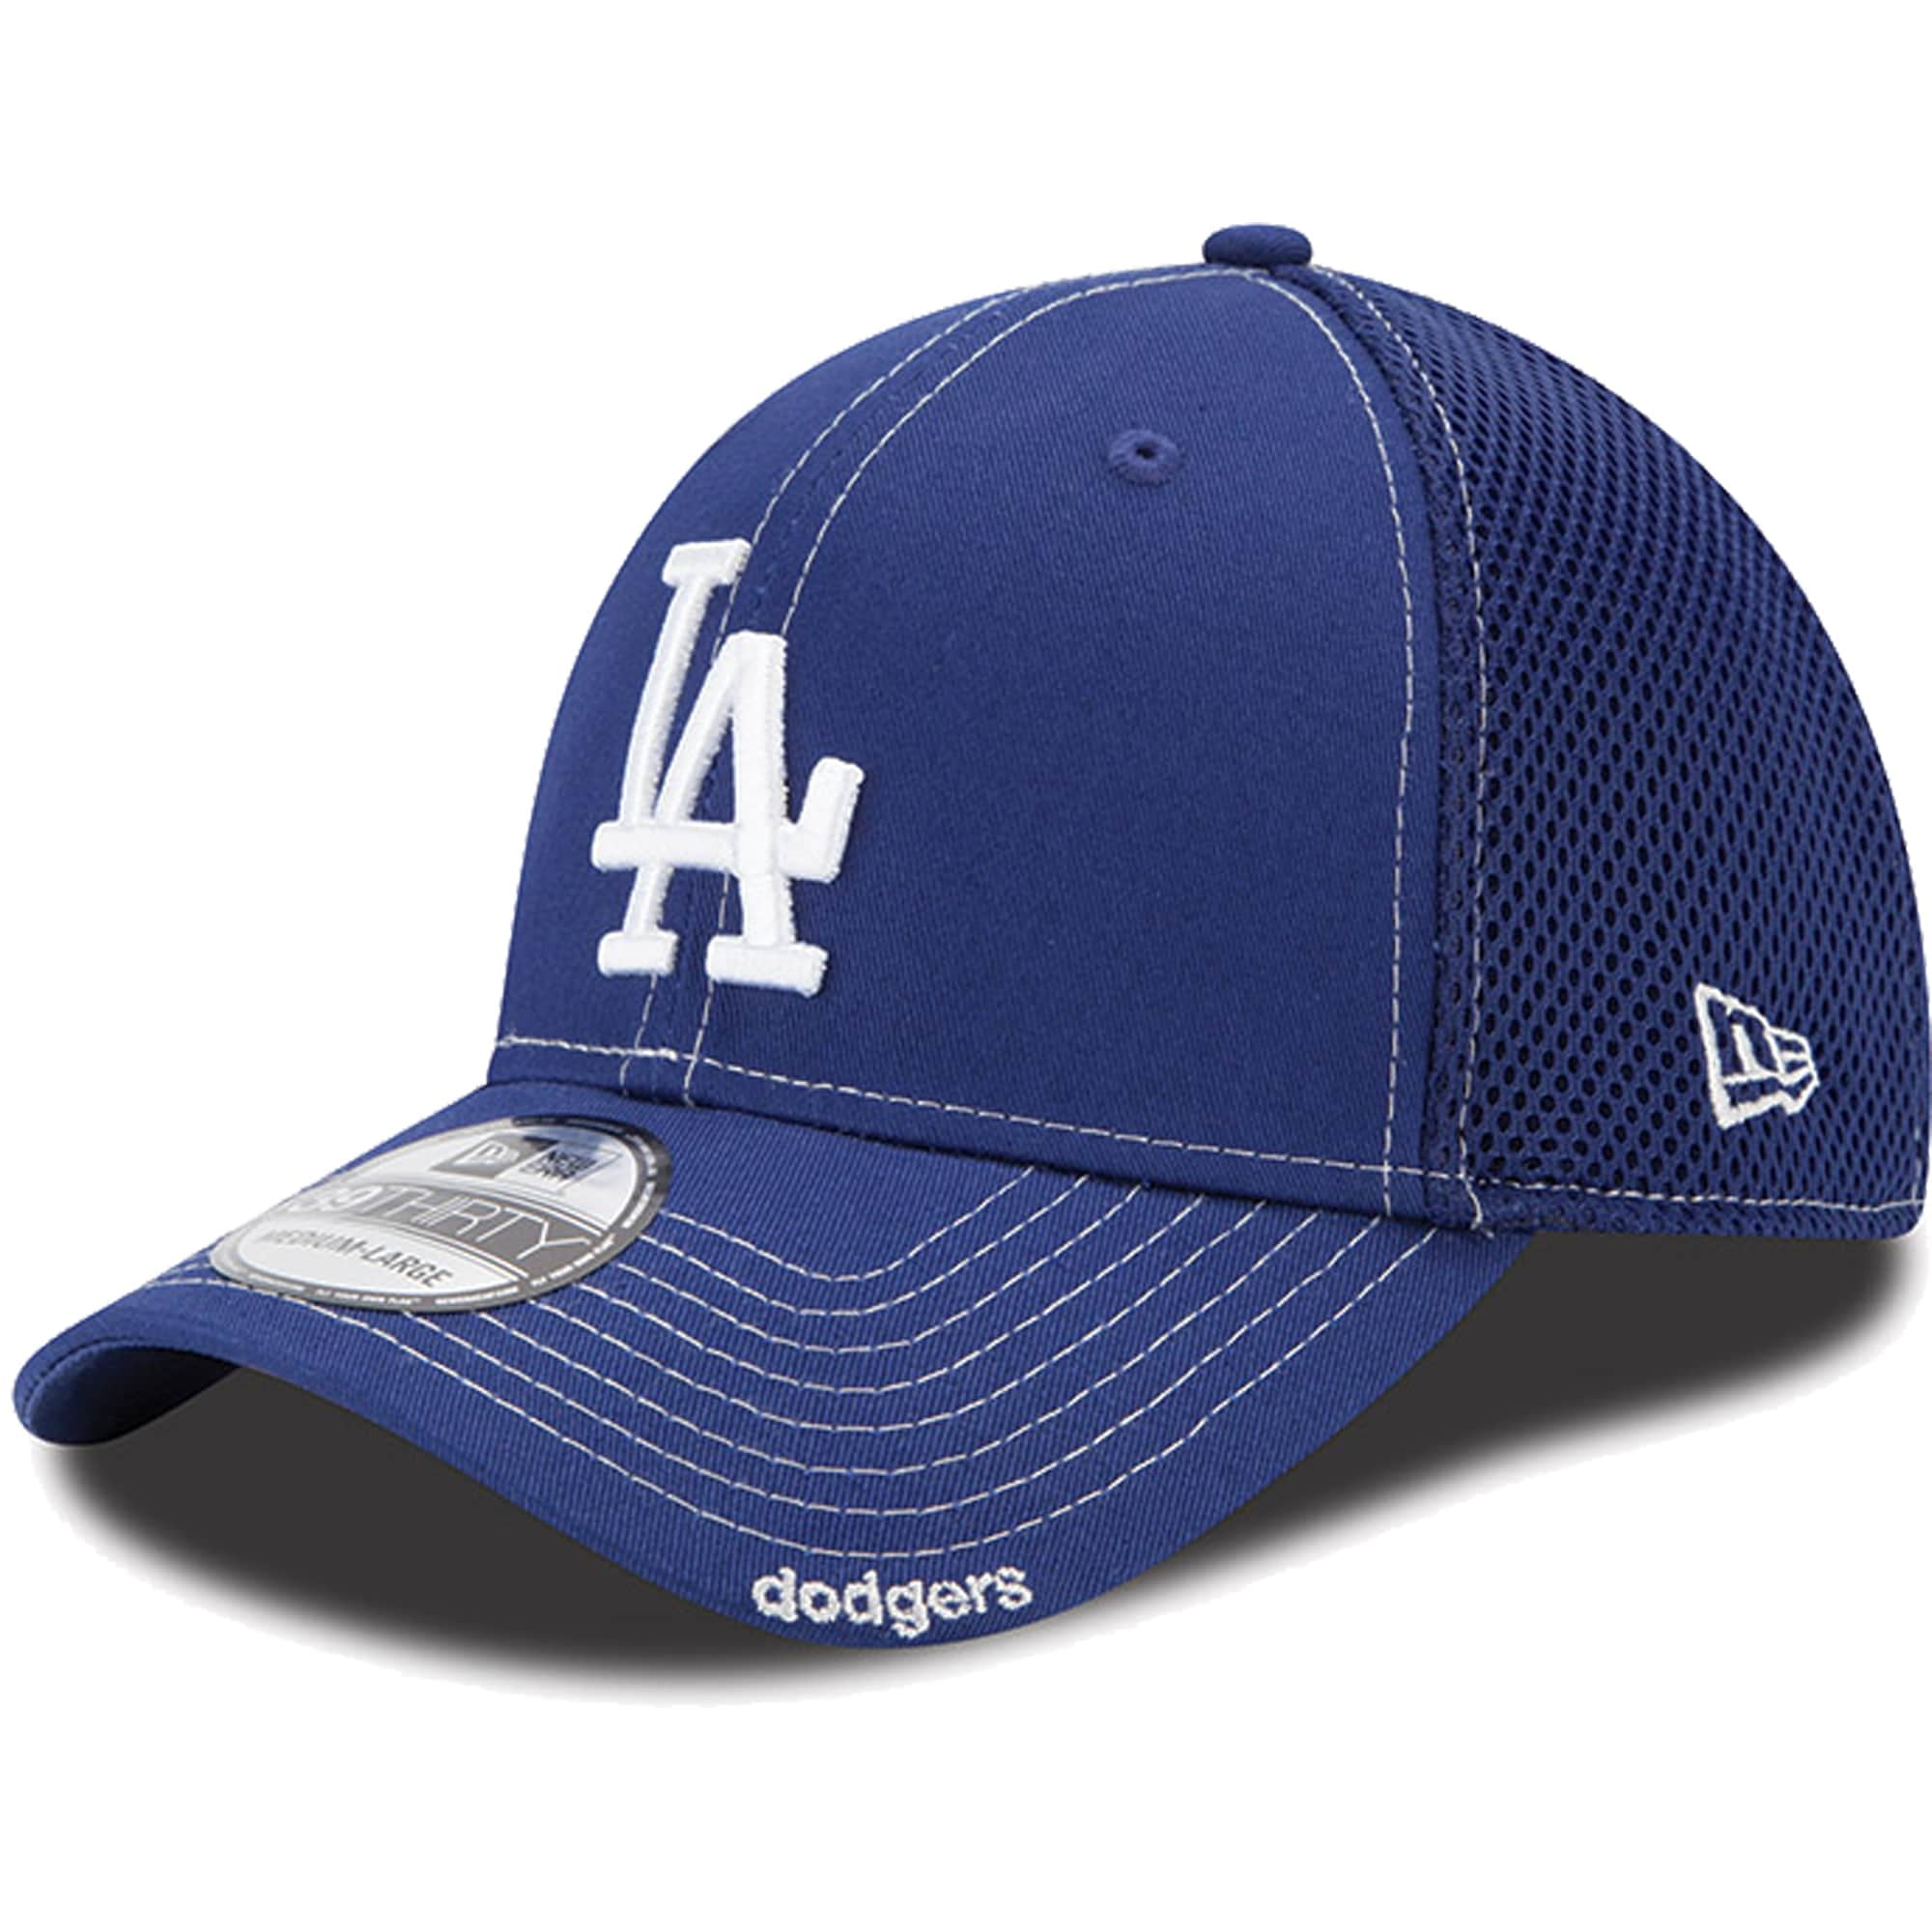 New Era Los Angeles Dodgers Stretch Fit Cap 3930 39thirty Curved Visor S M Royal 